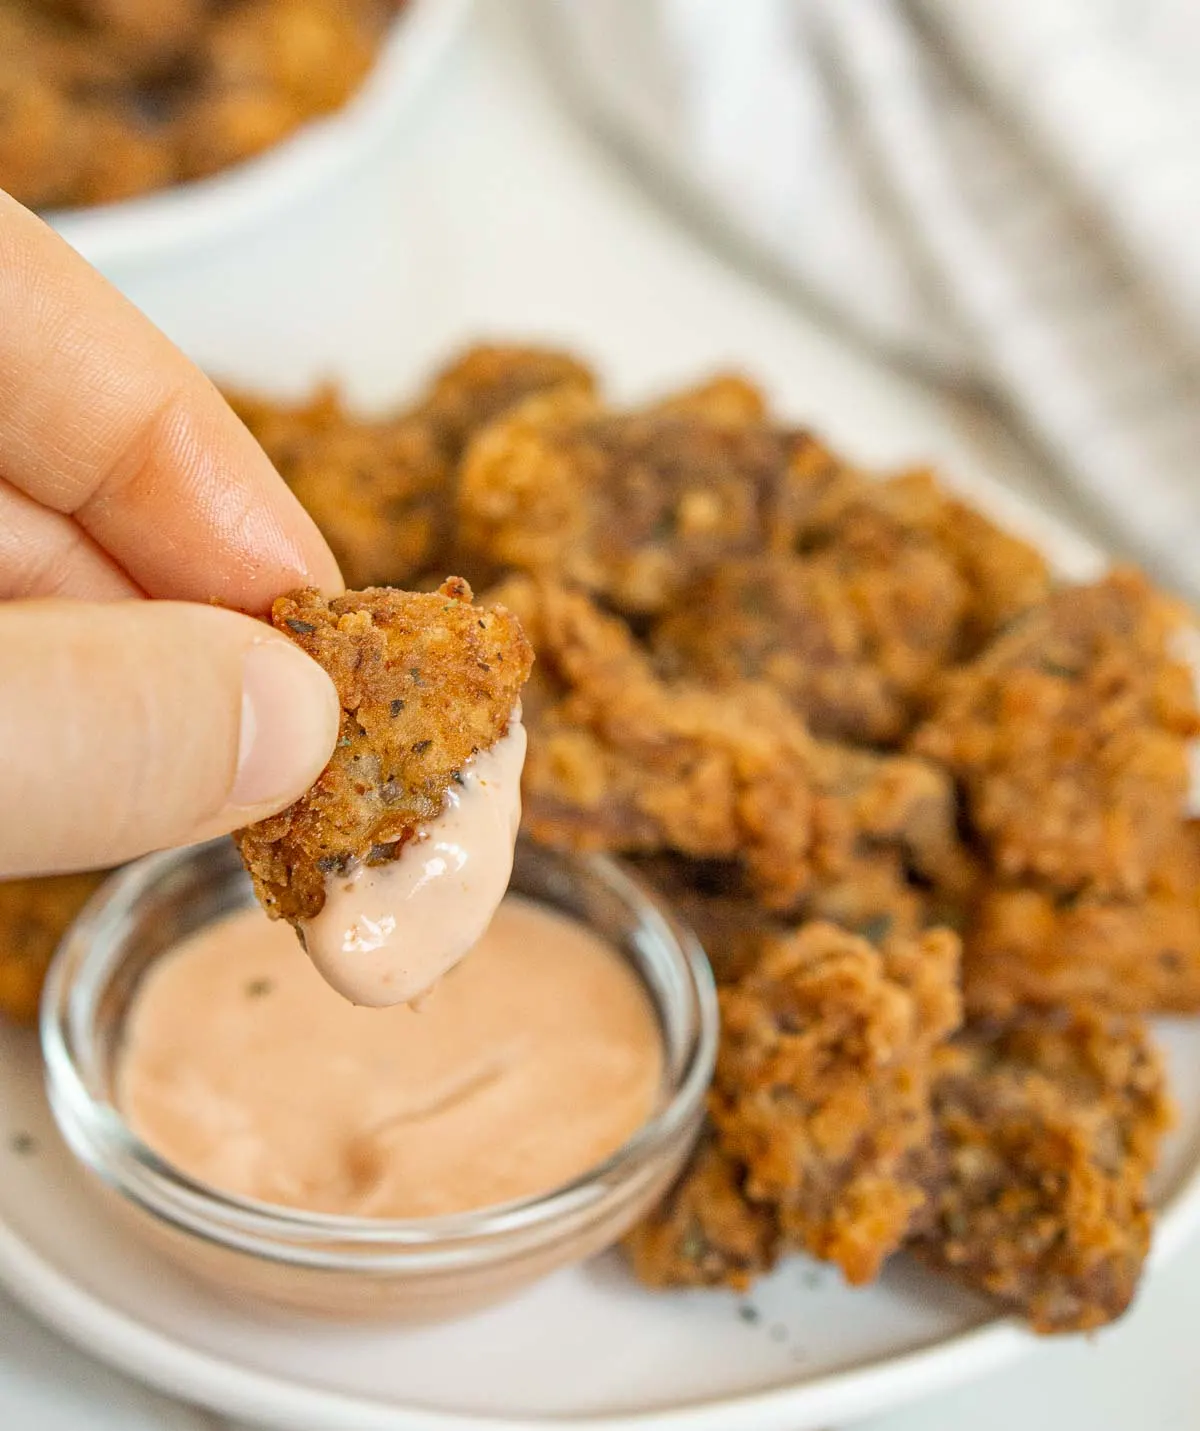 Hand dipping fried chicken heart into ketchup and mayo sauce.